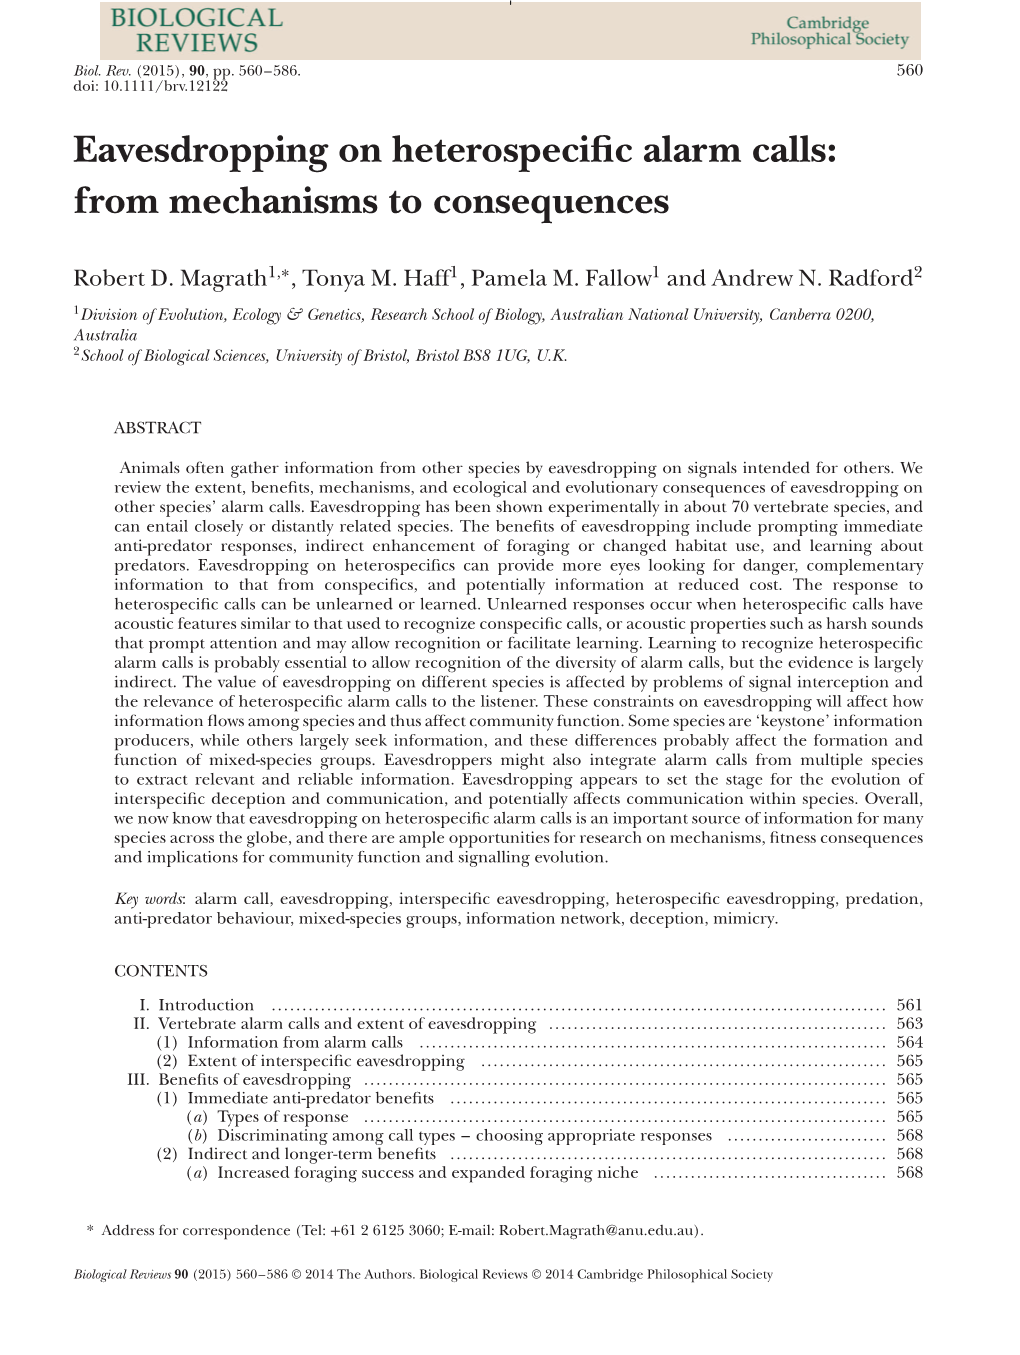 Eavesdropping on Heterospecific Alarm Calls: from Mechanisms to Consequences